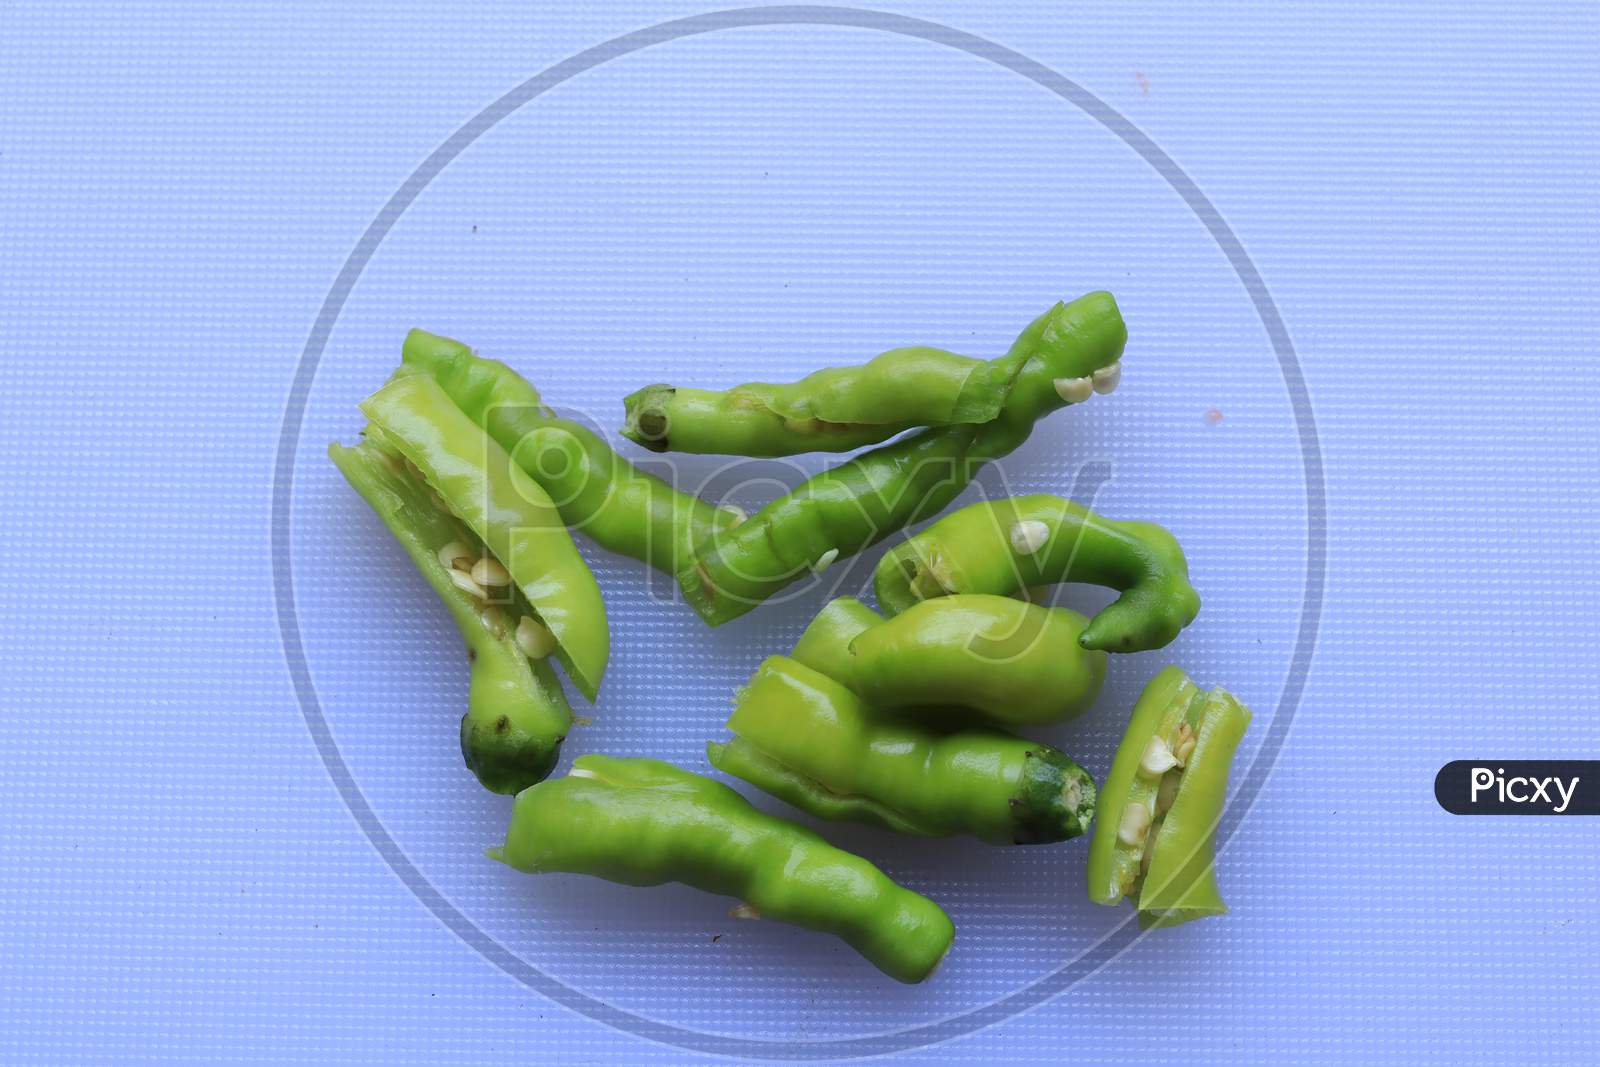 green cayenne pepper with a white background